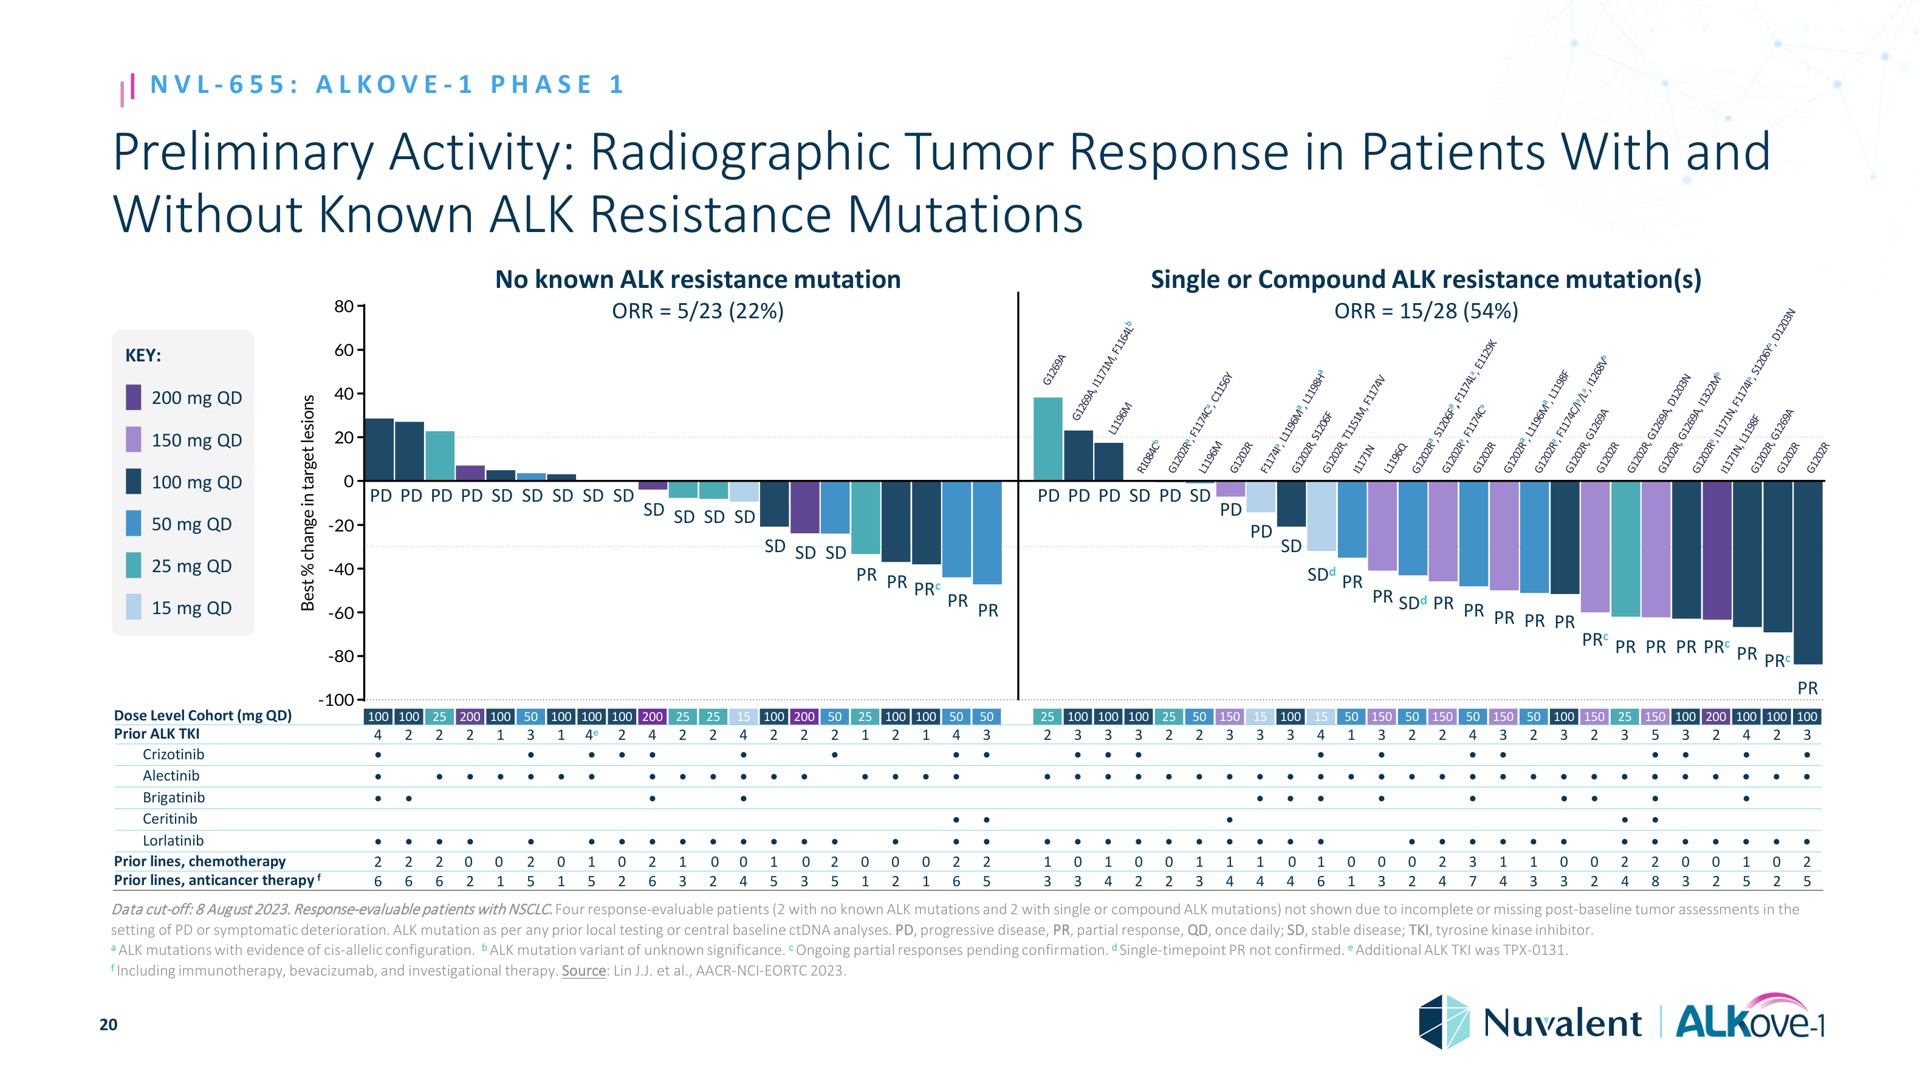 preliminary activity radiographic tumor response in patients with and without known alk resistance mutations phase no mutation single or compound mutation key so as a dose level cohort prior prior lines chemotherapy prior lines anticancer therapy i data cut off august response evaluable four response evaluable no single or compound not shown due to incomplete or missing post assessments the setting of or symptomatic deterioration mutation as per any prior local testing or central analyses progressive disease partial once daily stable disease tyrosine kinase inhibitor evidence of allelic configuration mutation variant of unknown significance ongoing partial responses pending confirmation single not confirmed additional was including investigational therapy source lin i i | Nuvalent